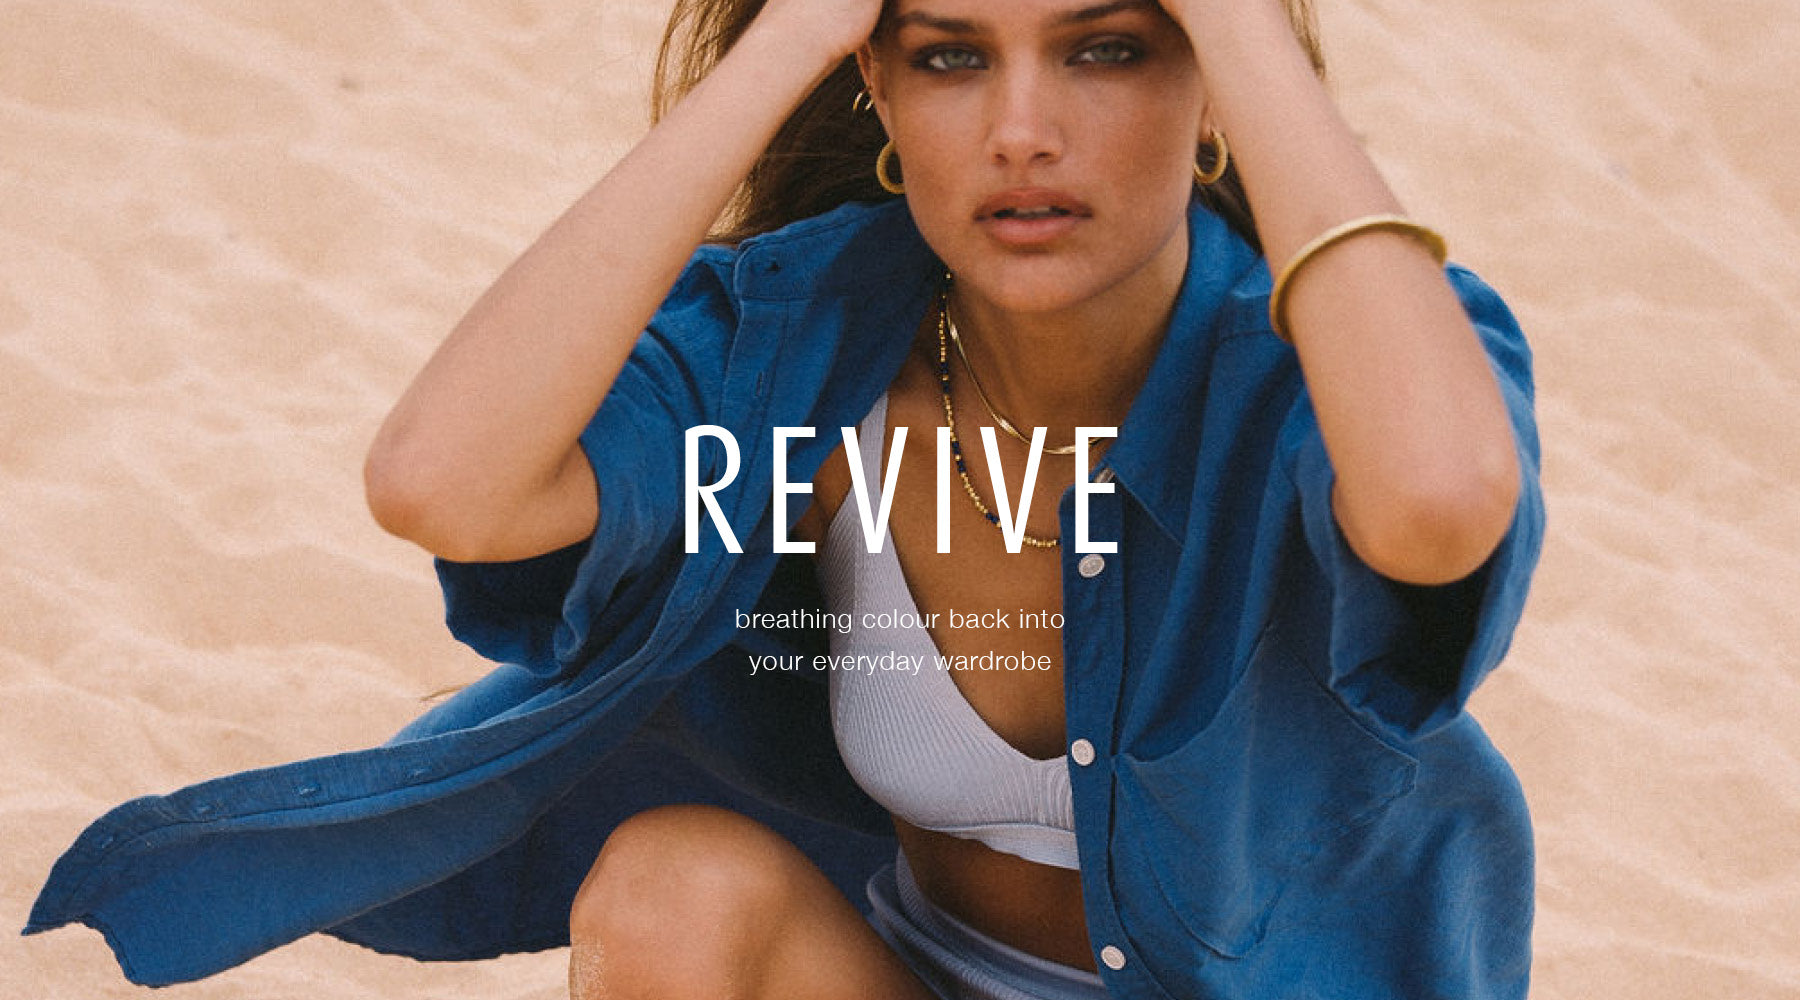 Revive Campaign Image 1 | The Bali Tailor